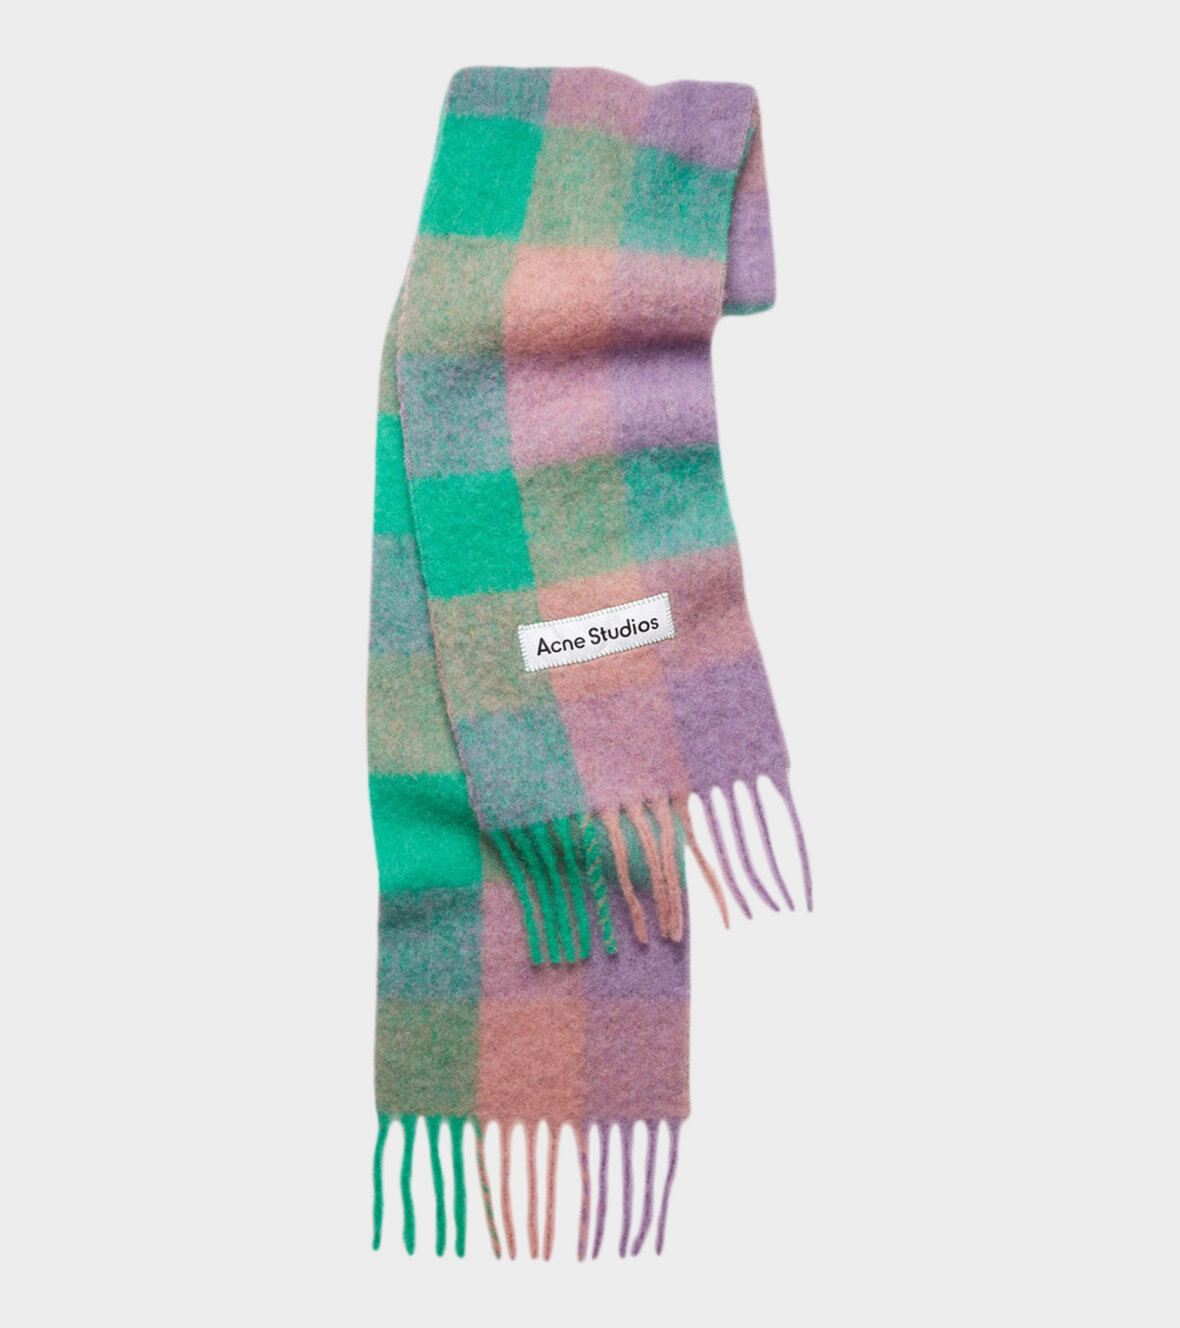 dr. - Acne Studios Vally Scarf Lilac Purple/Green/Pink